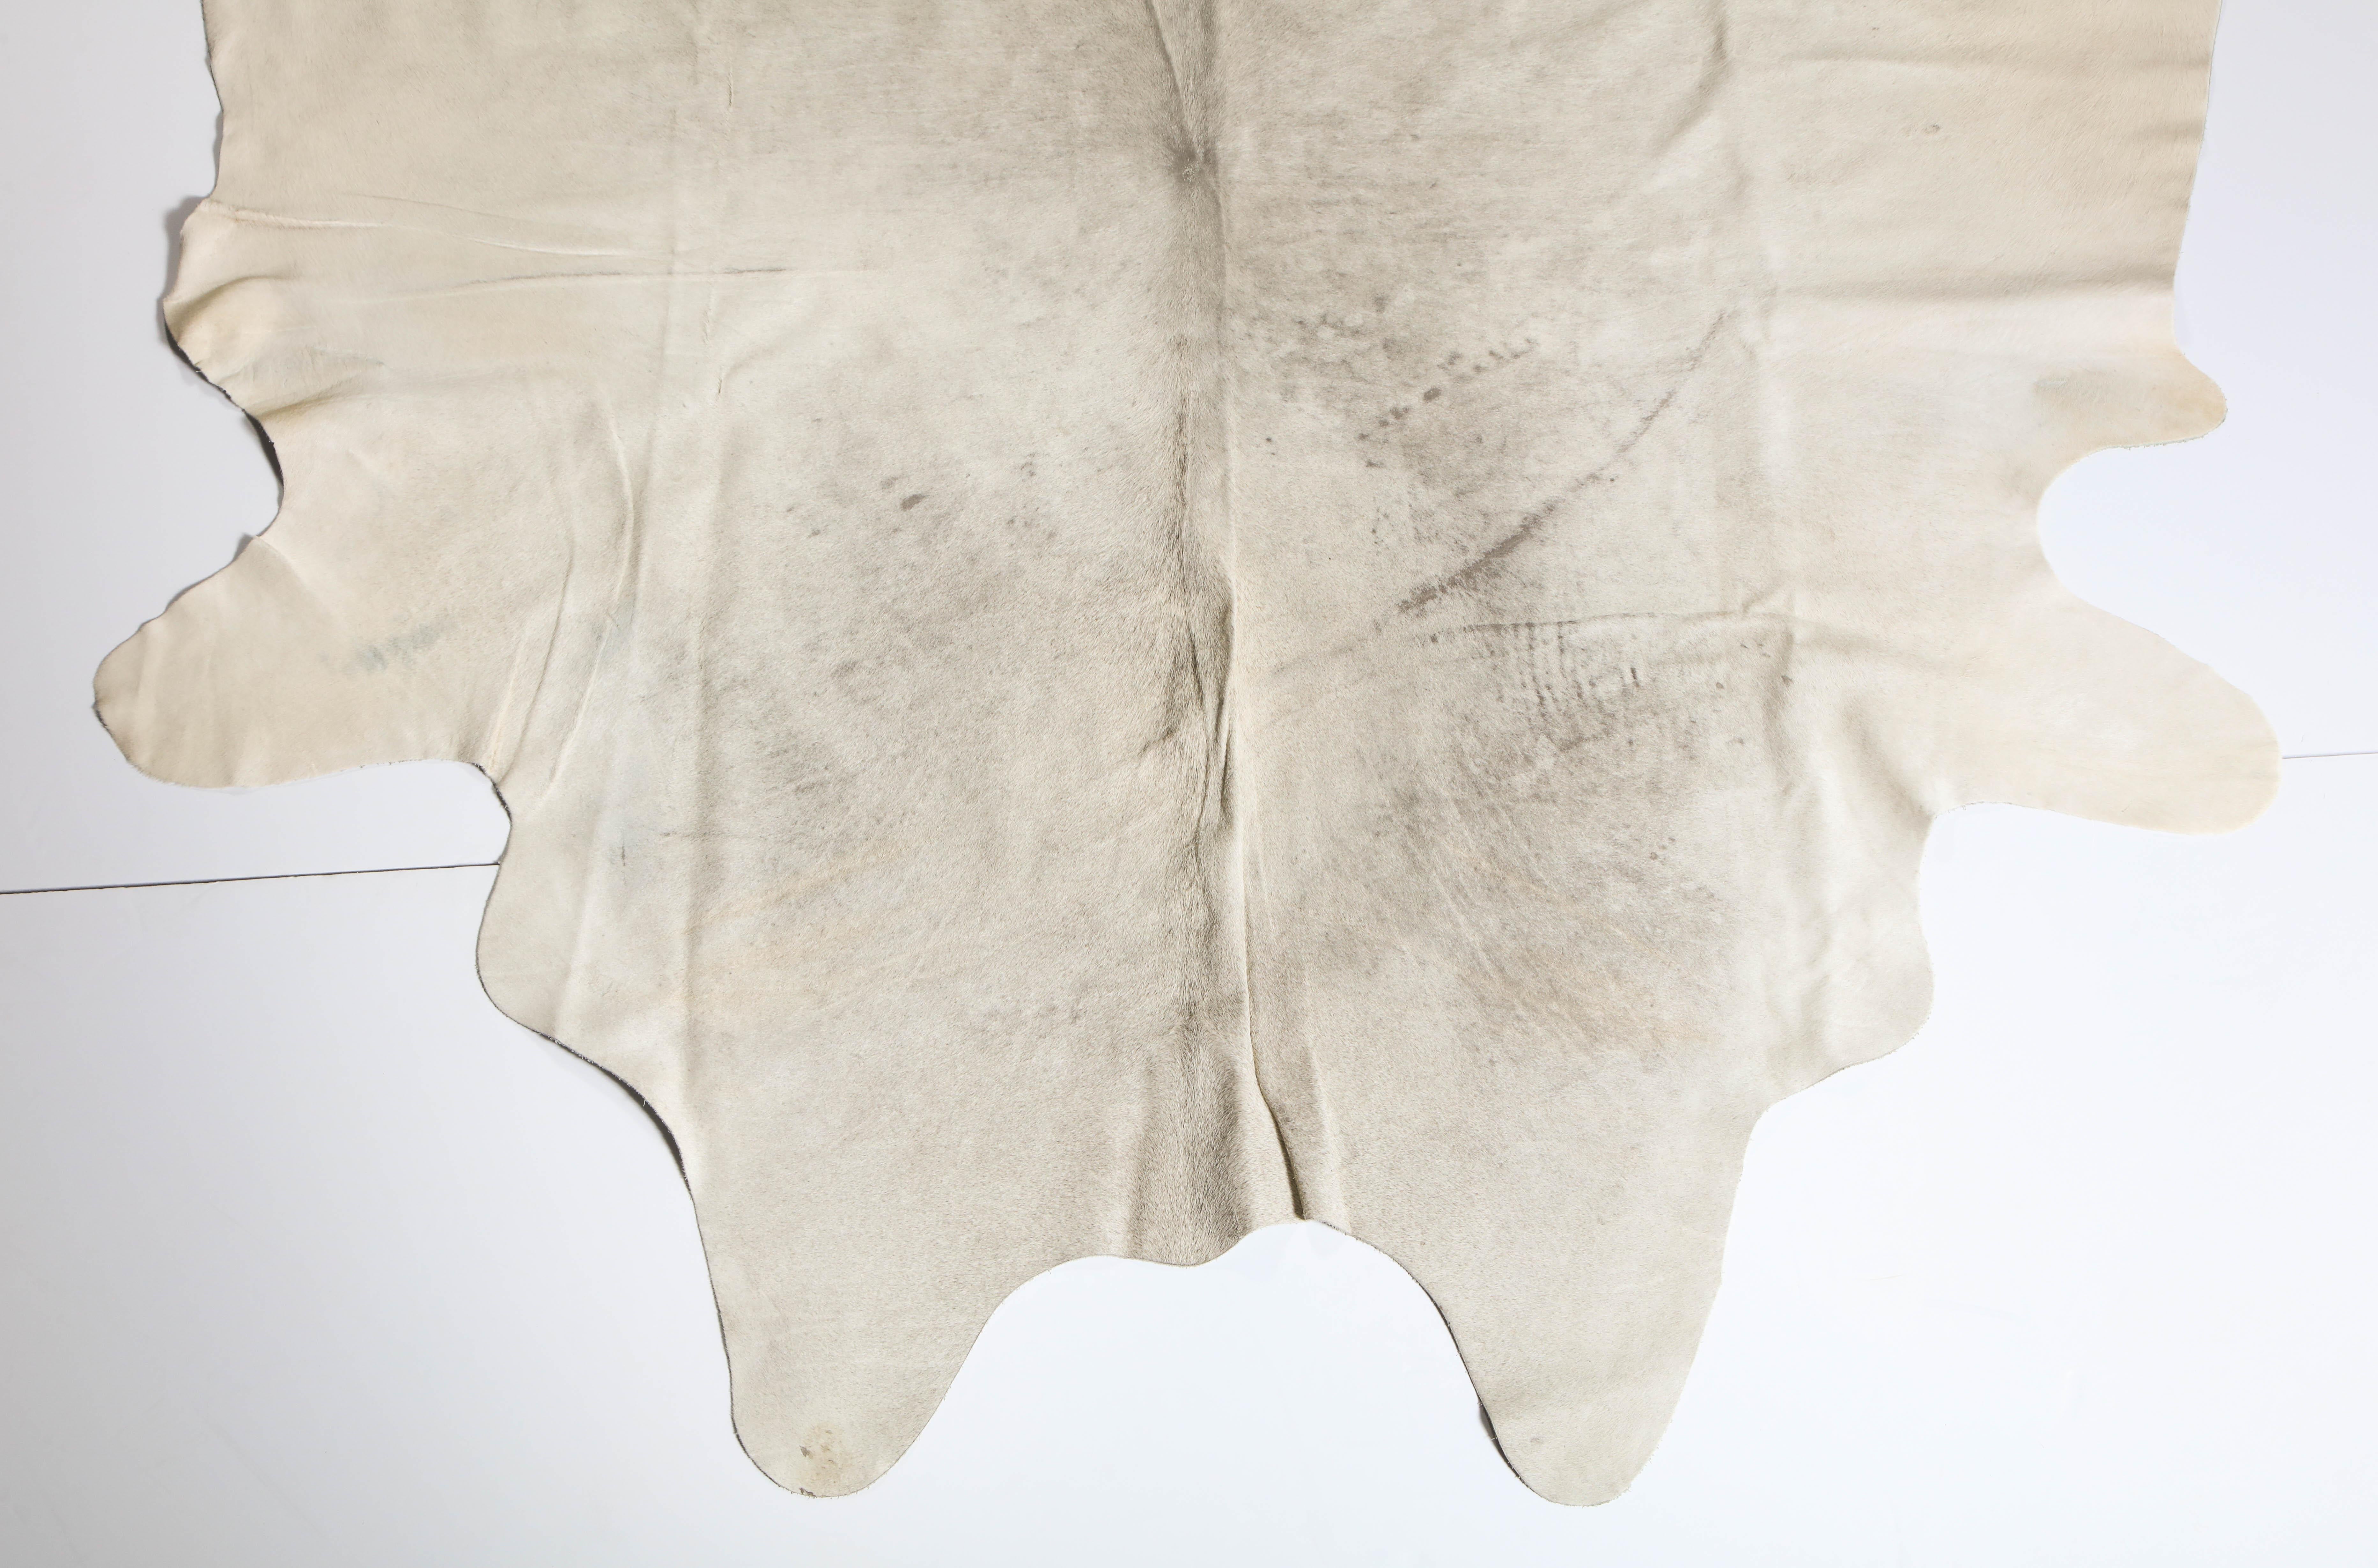 Modern Cow Hide, Vintage, Cream with Some Gray Tones, Good Condition